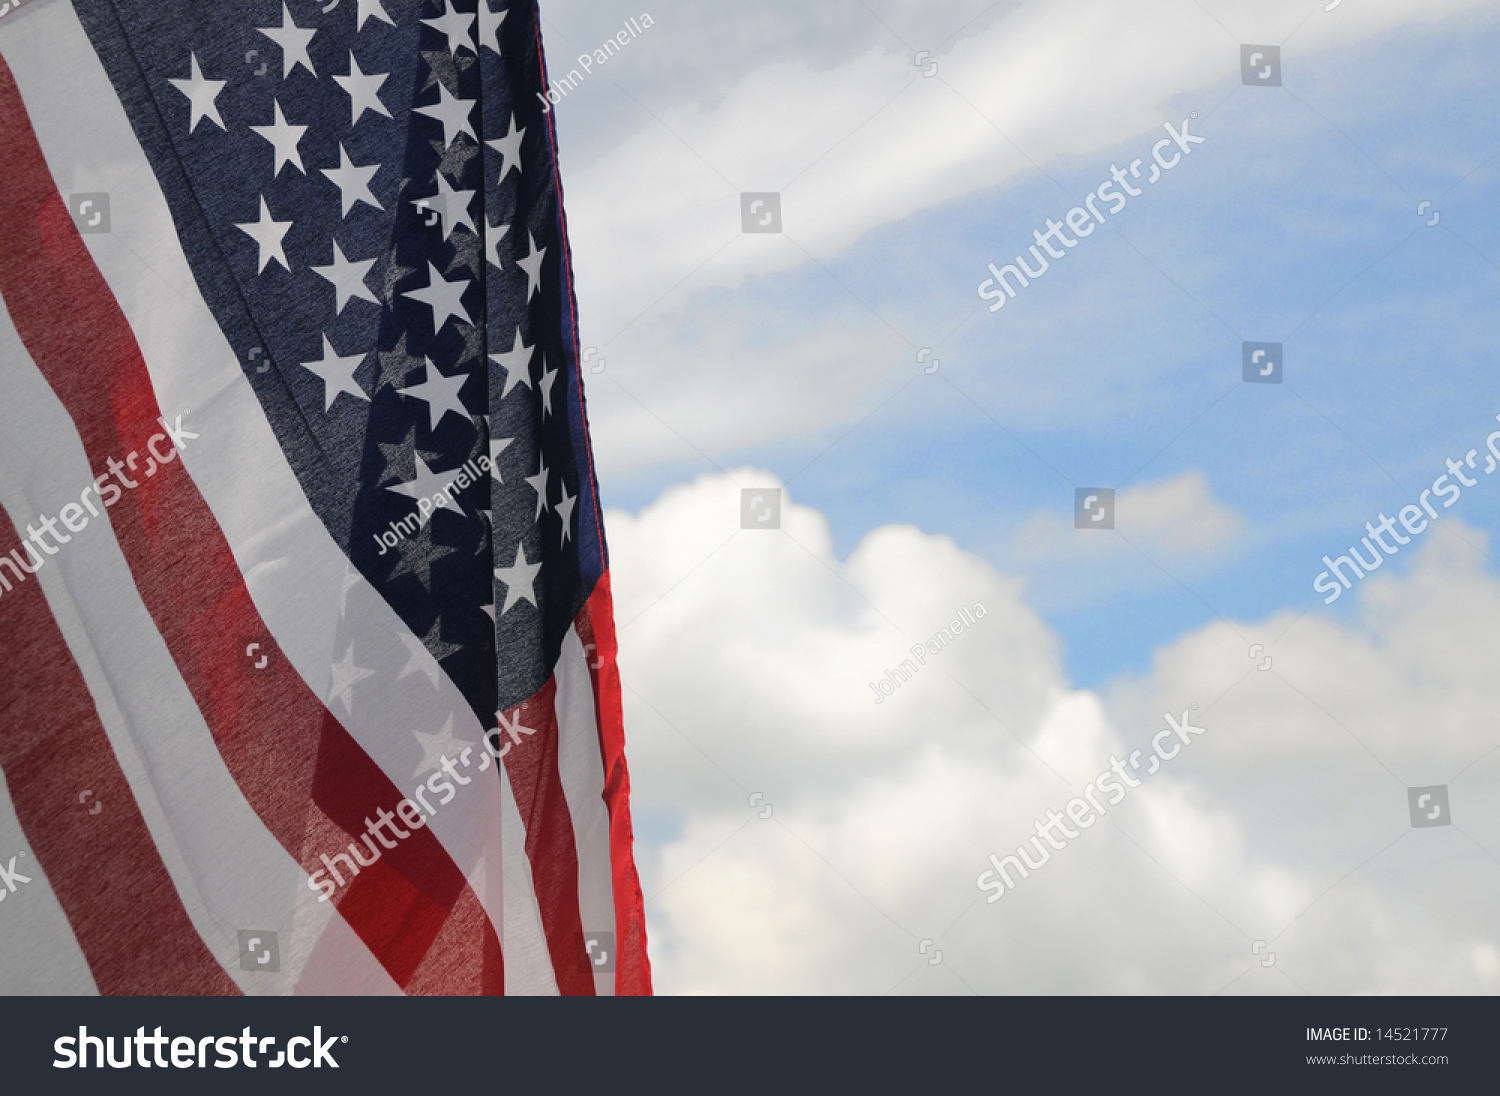 United States Flag With Partly Cloudy Sky Background Stock